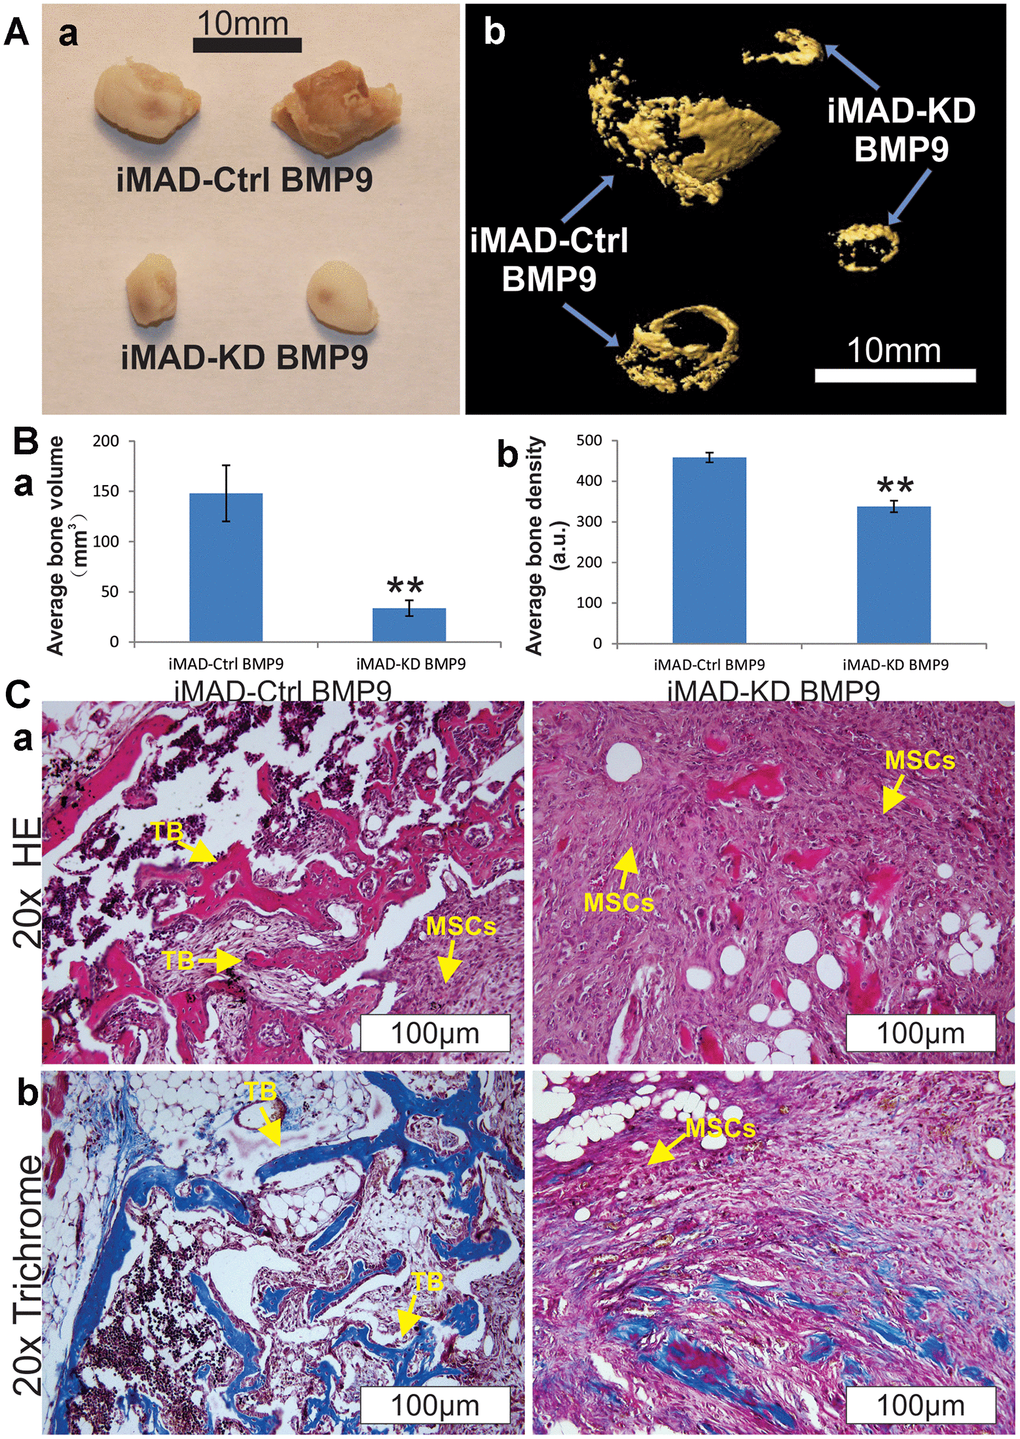 HOTAIR knockdown attenuates BMP9-induced ectopic bone formation from iMAD cells in vivo. (A) Gross view (a) and μCT imaging (b) of the BMP9-induced ectopic bone formation from iMAD-Ctrl and iMAD-KD cells. The retrieved bone masses from indicated groups were imaged using μCT followed by 3D reconstruction (b). No detectable masses were retrieved from the Ad-GFP-transduced iMAD-Ctrl or iMAD-KD cells group. (B) The average bone volumes (a) and average bone density (b) for the indicated groups were determined and analyzed using the Amira program. Representative images are shown. “**” p C) HE (a) and Trichrome staining (b) of the retrieved bone masses. Representative images are shown. TB, trabecular bone; MSCs, undifferentiated MSCs.